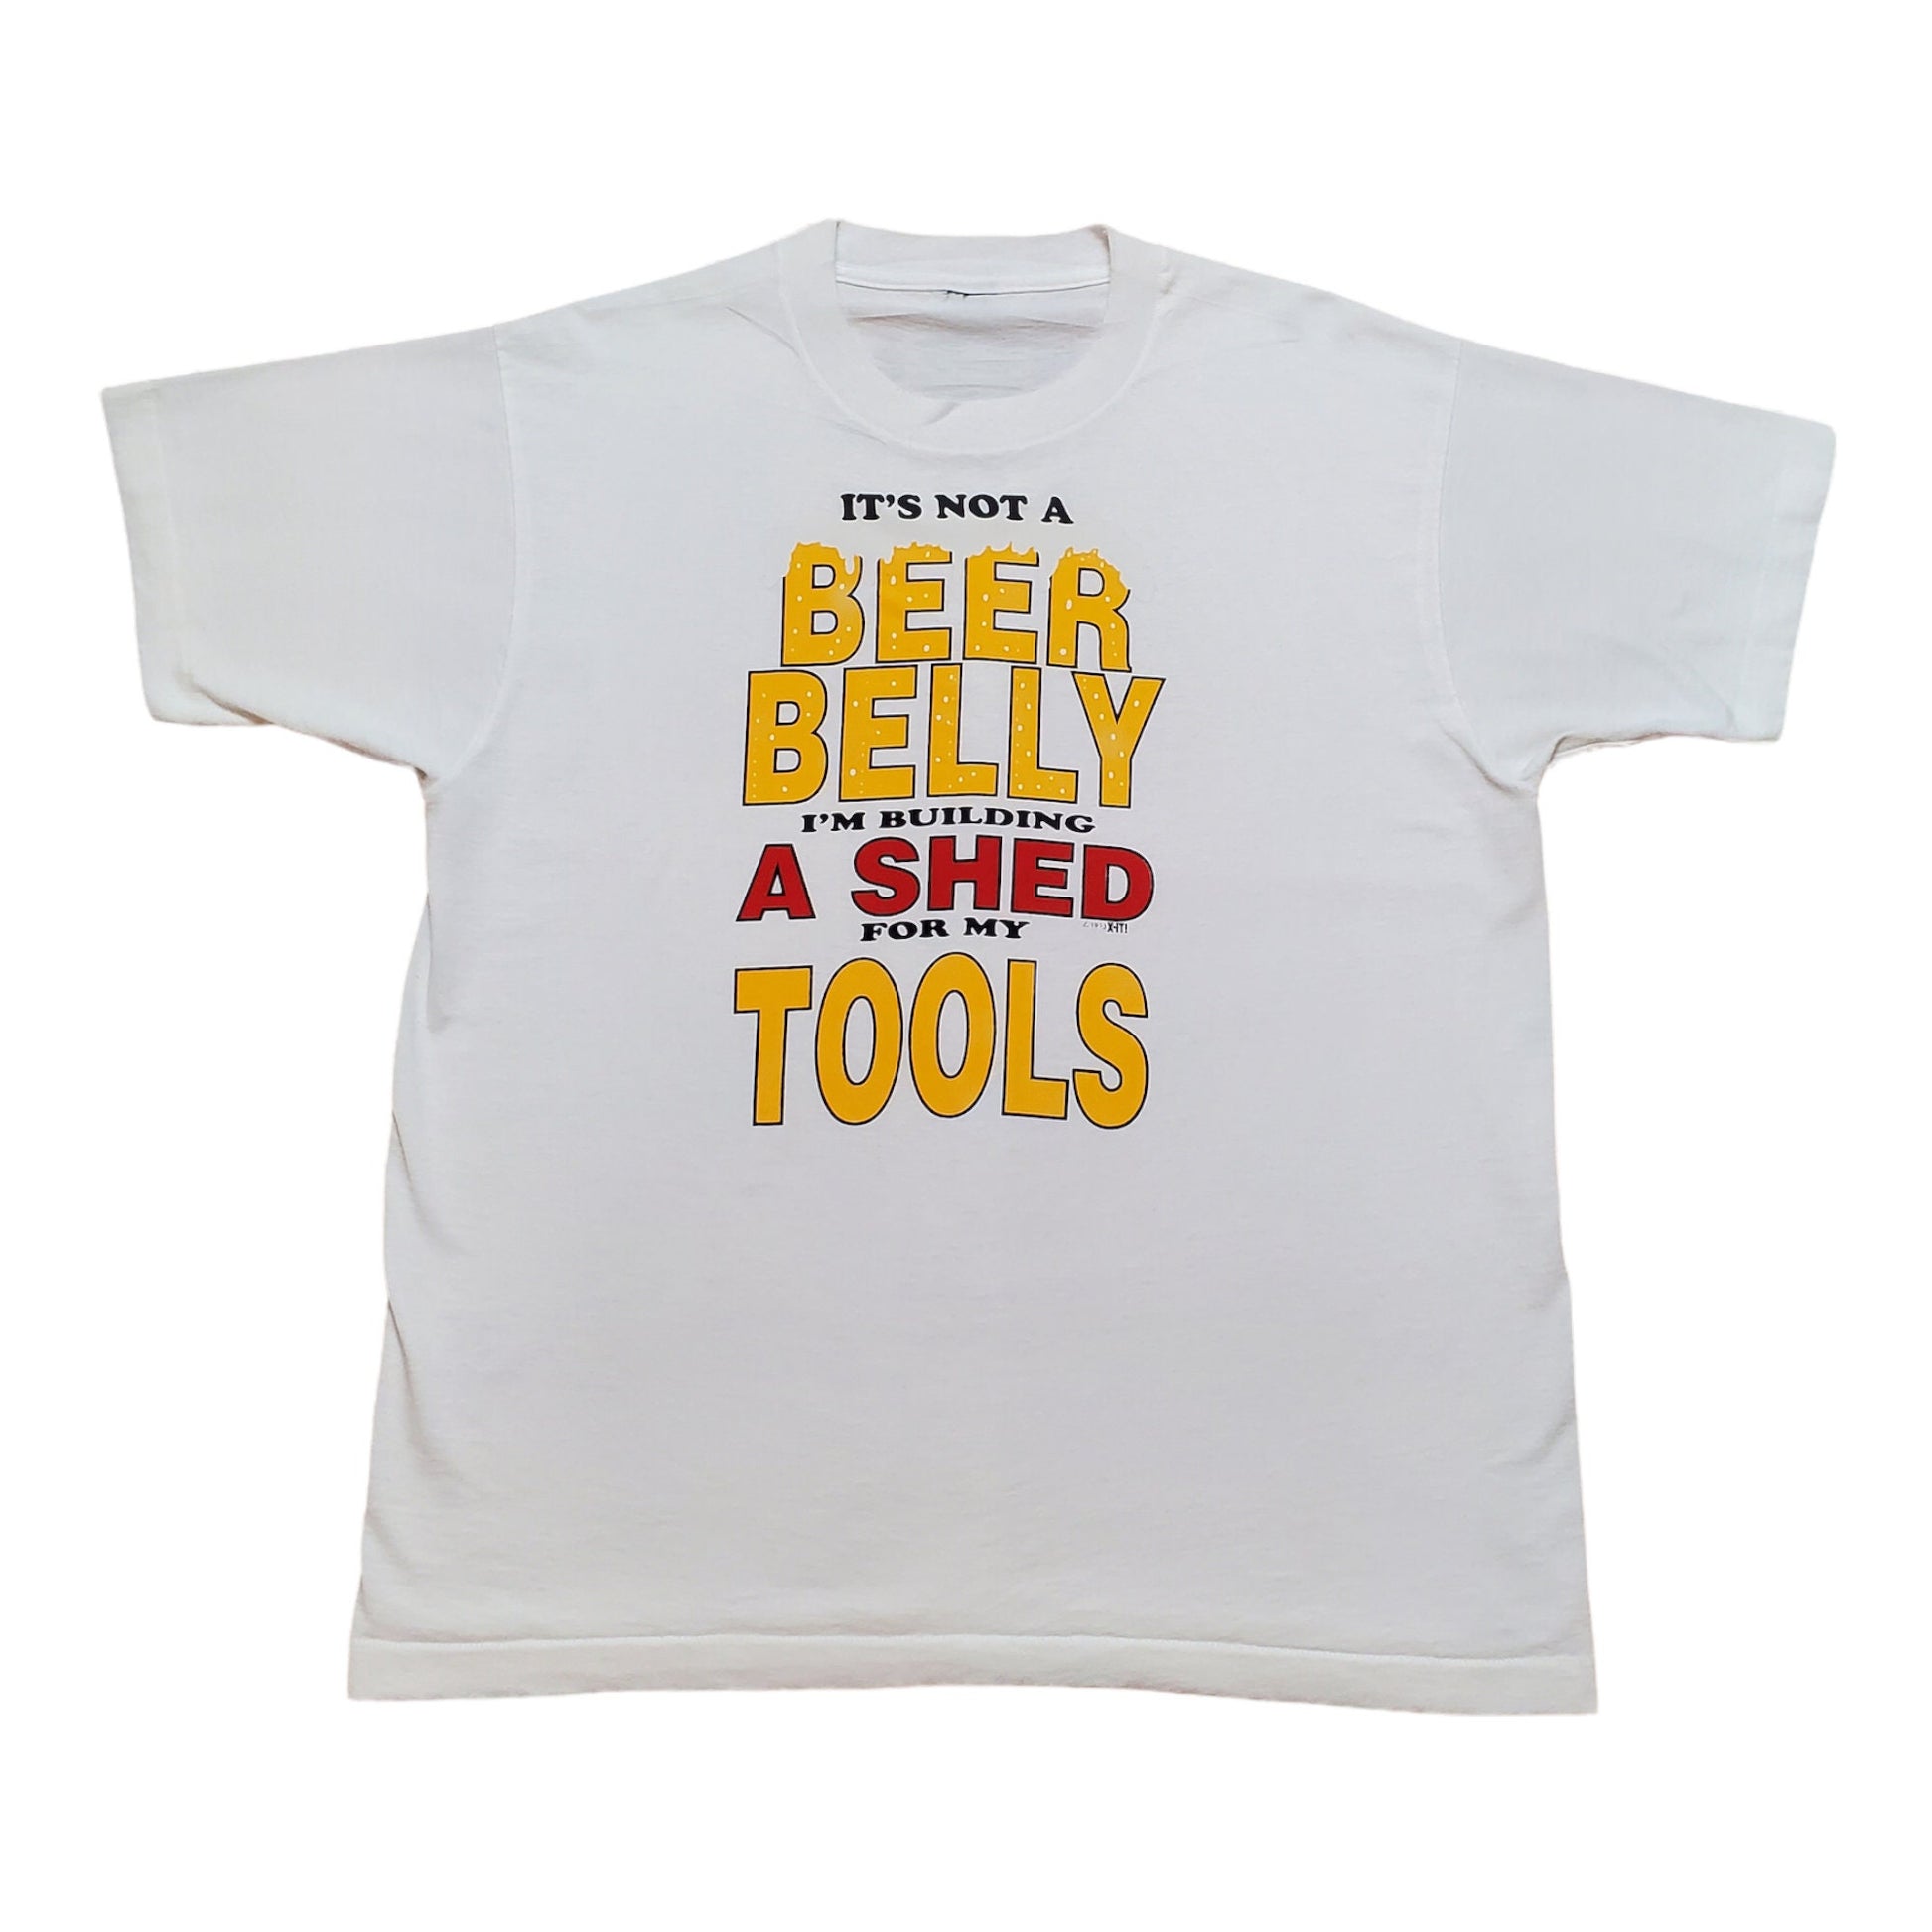 1990s Beer Belly Funny T-Shirt Size L/XL